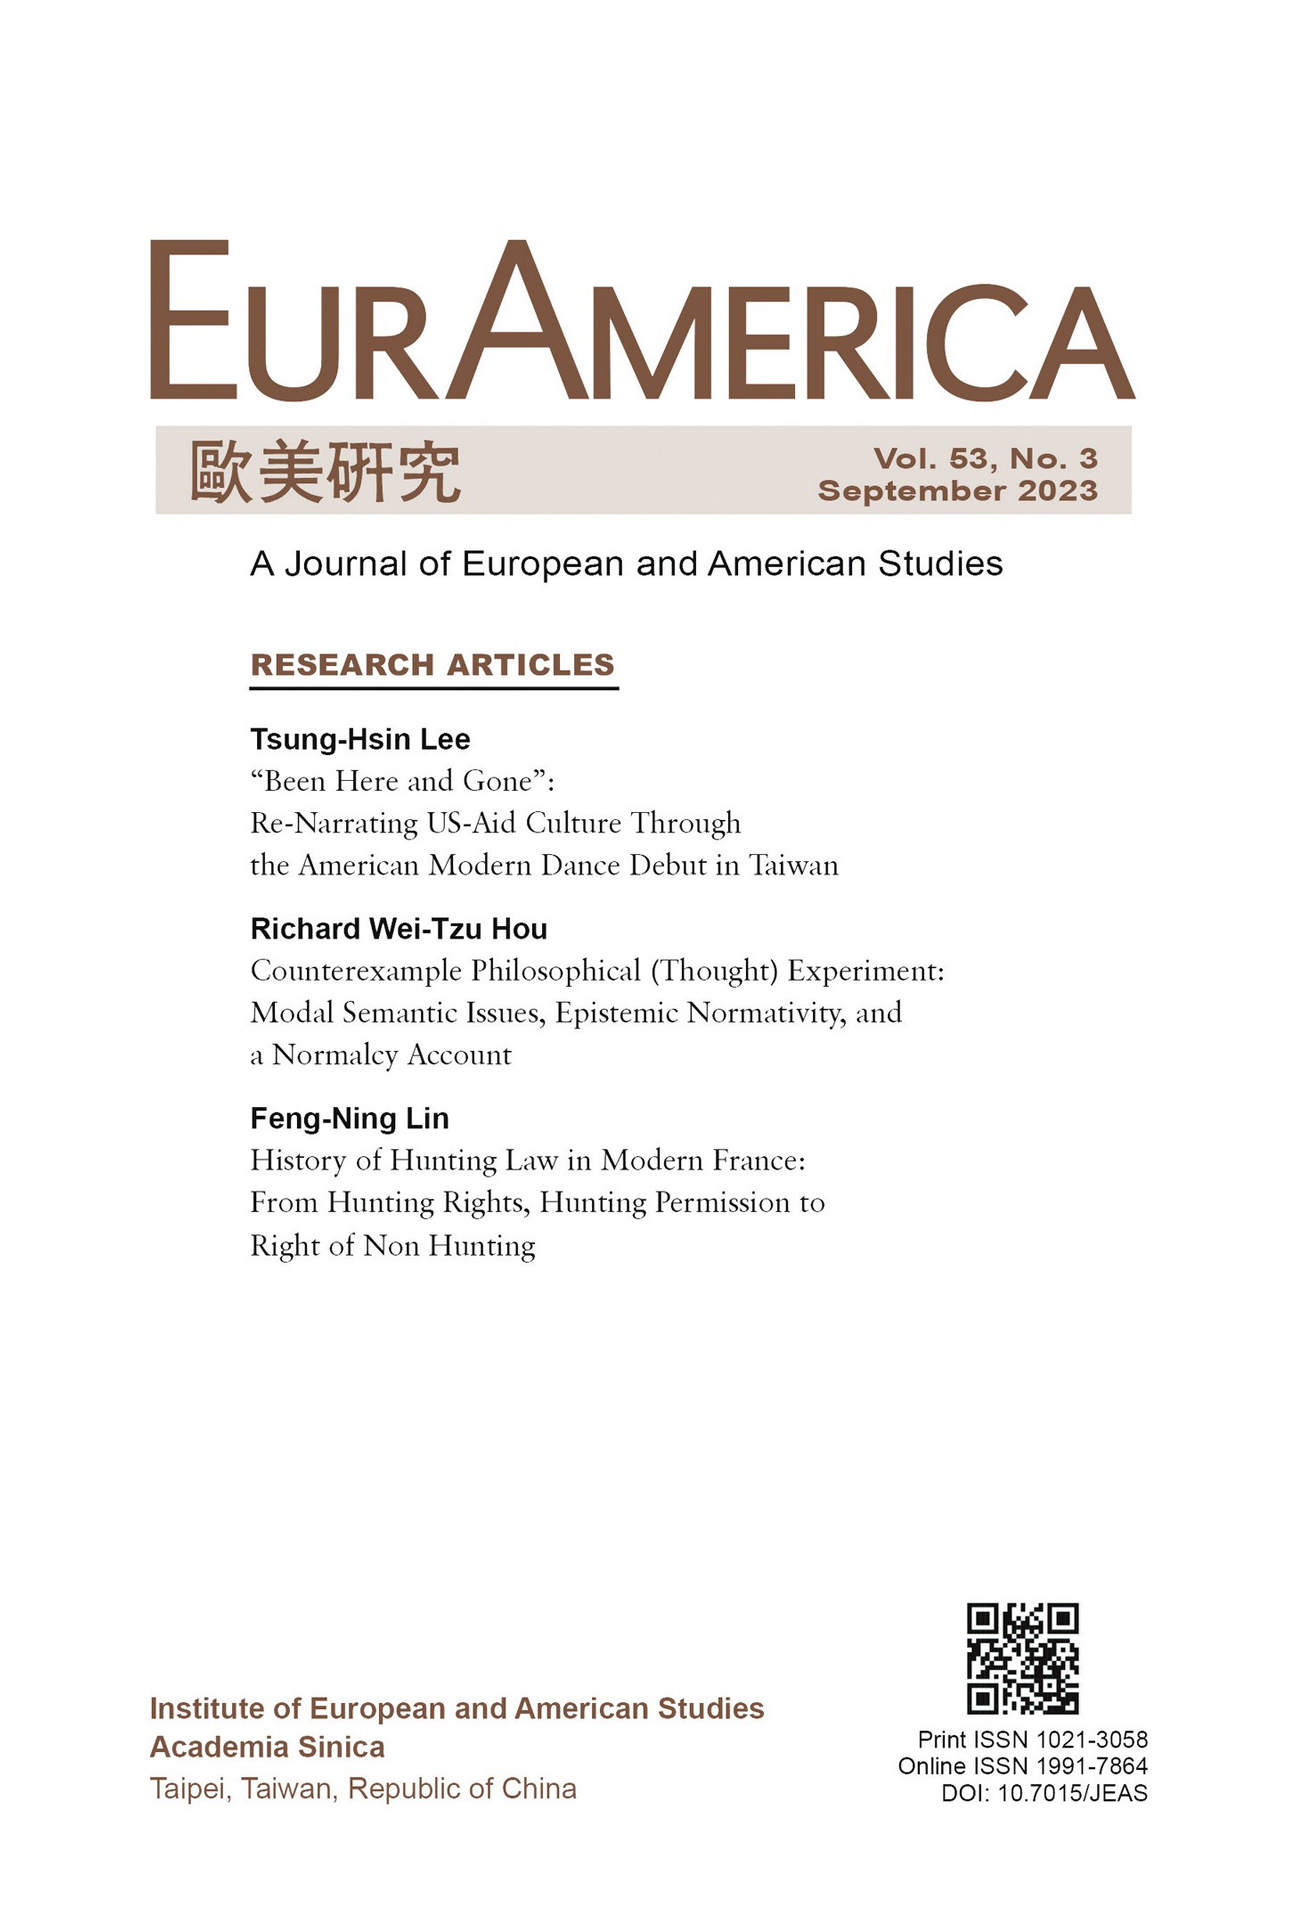 EurAmerica, Vol. 53, No. 3 is now available